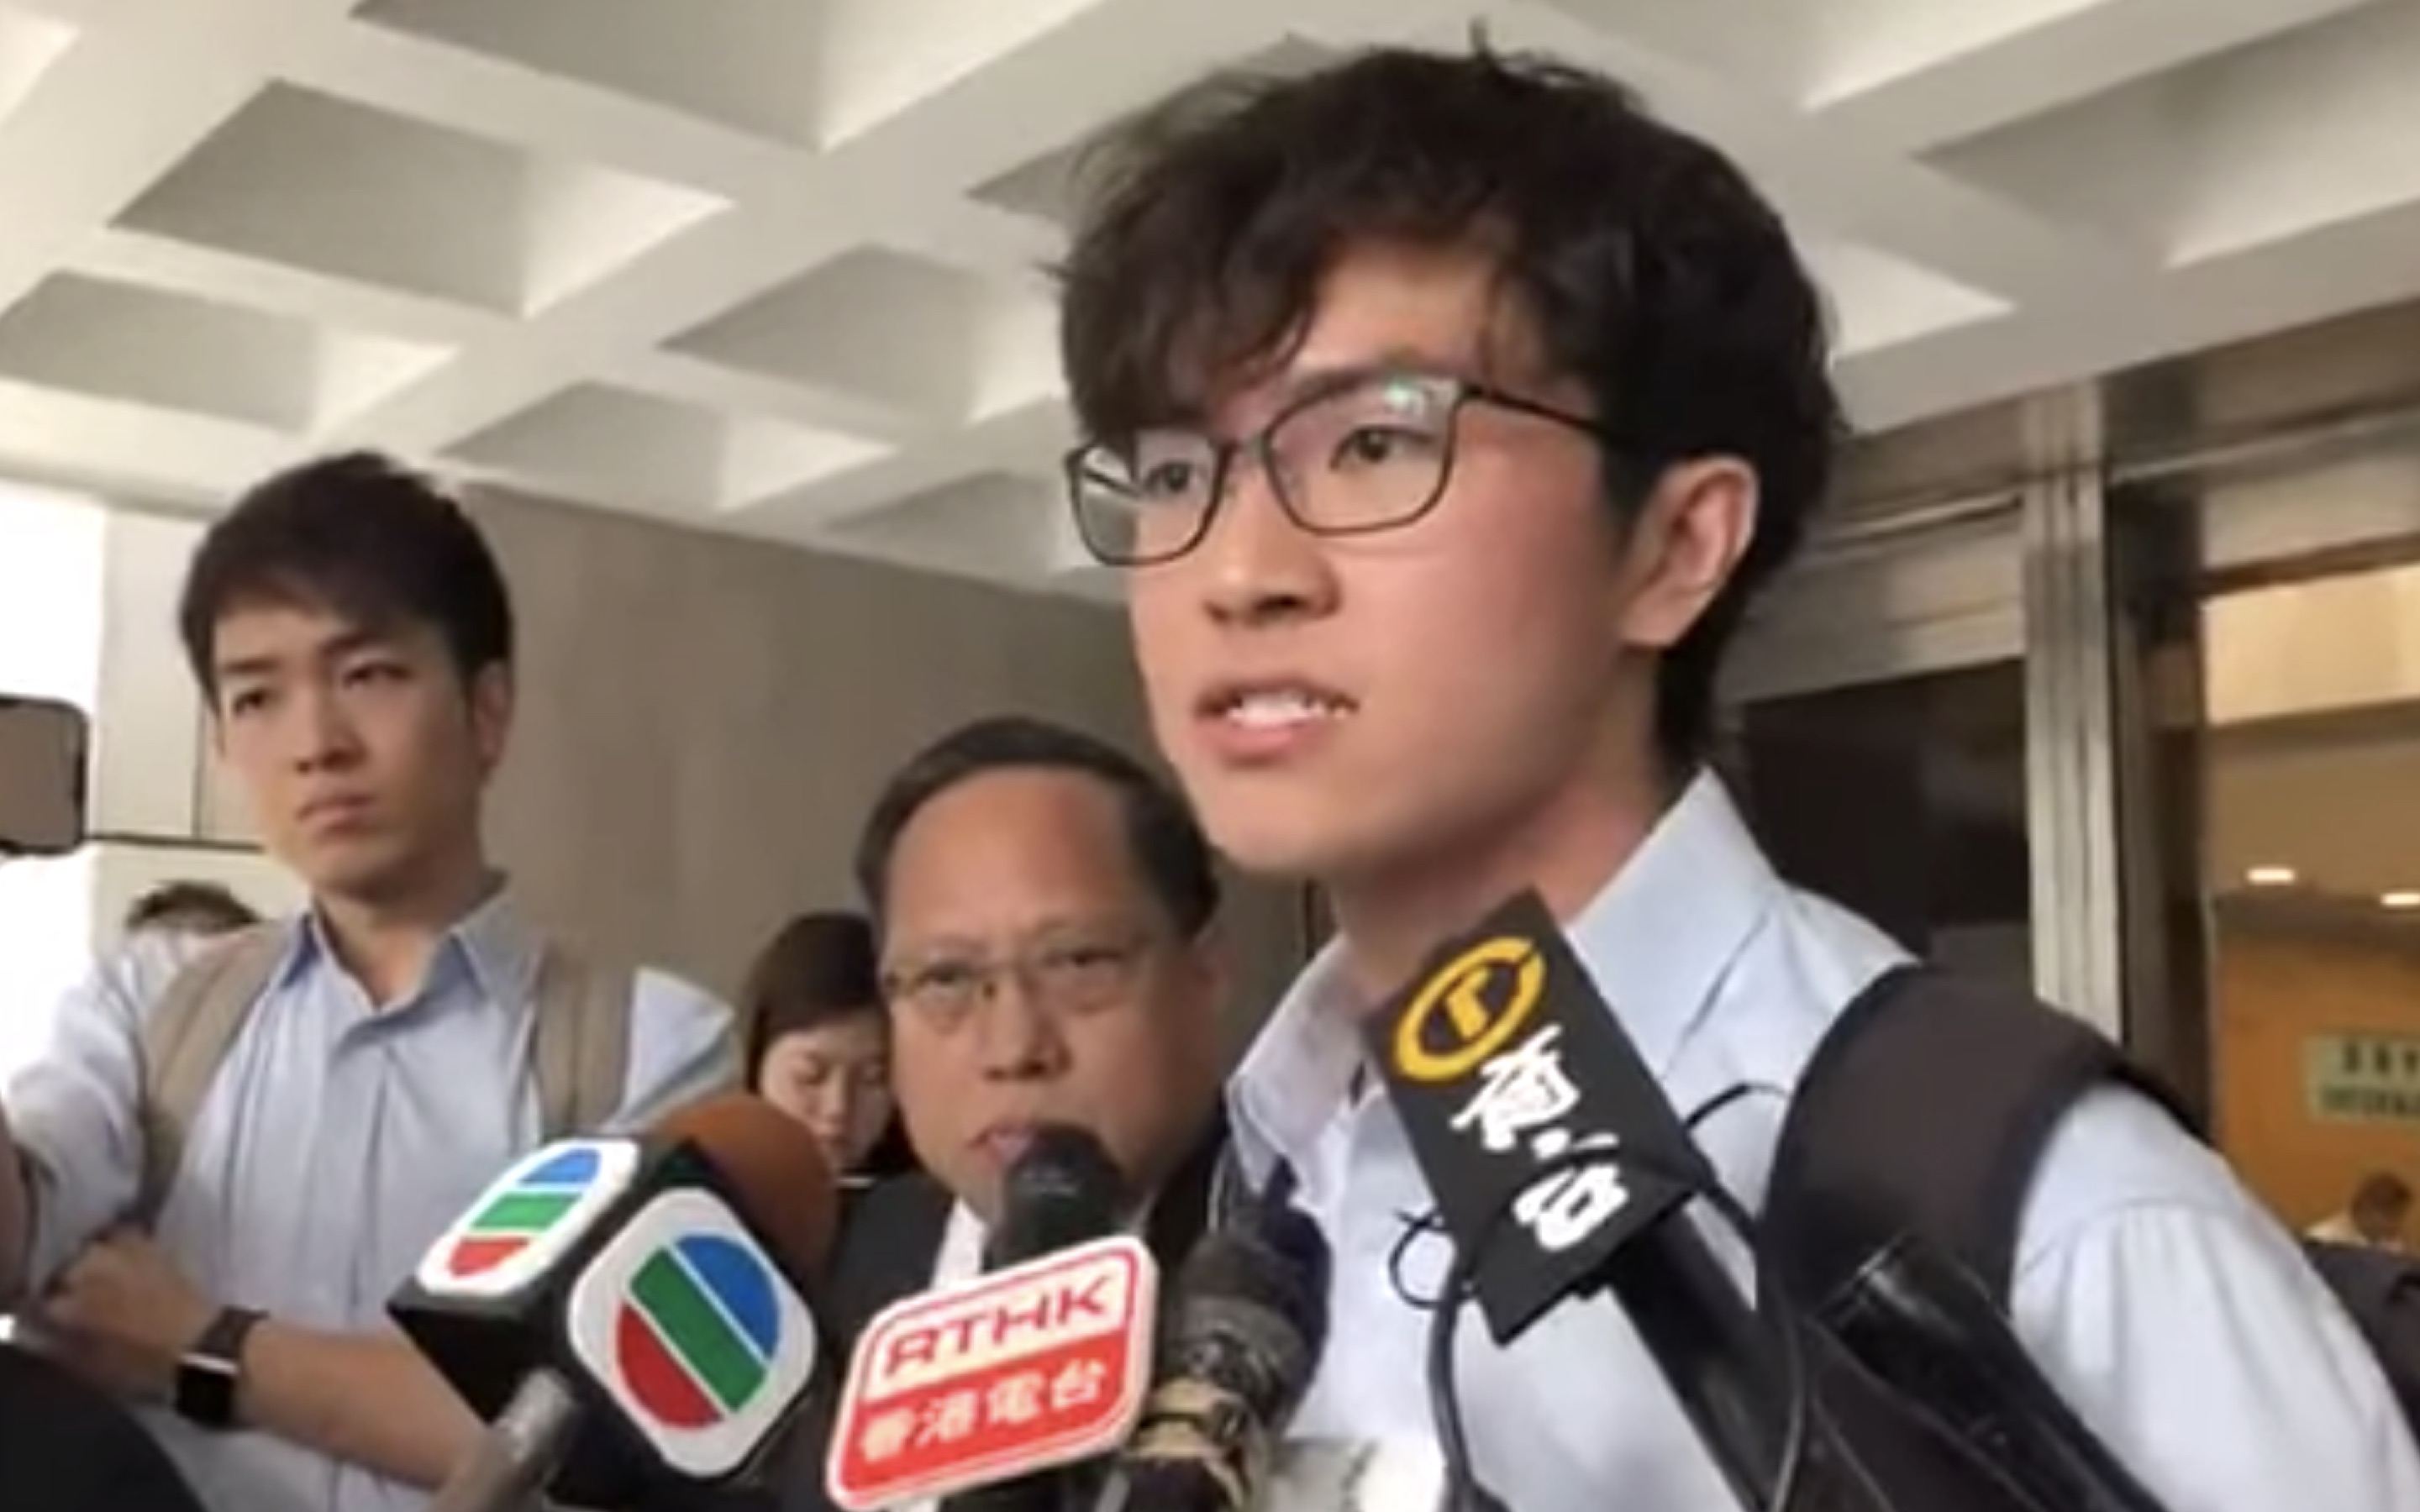 Chinese University of Hong Kong student union president Jacky So addresses reporters shortly after applying for an interim injunction to ban police from entering campus without a warrant following a night of intense clashes on campus.